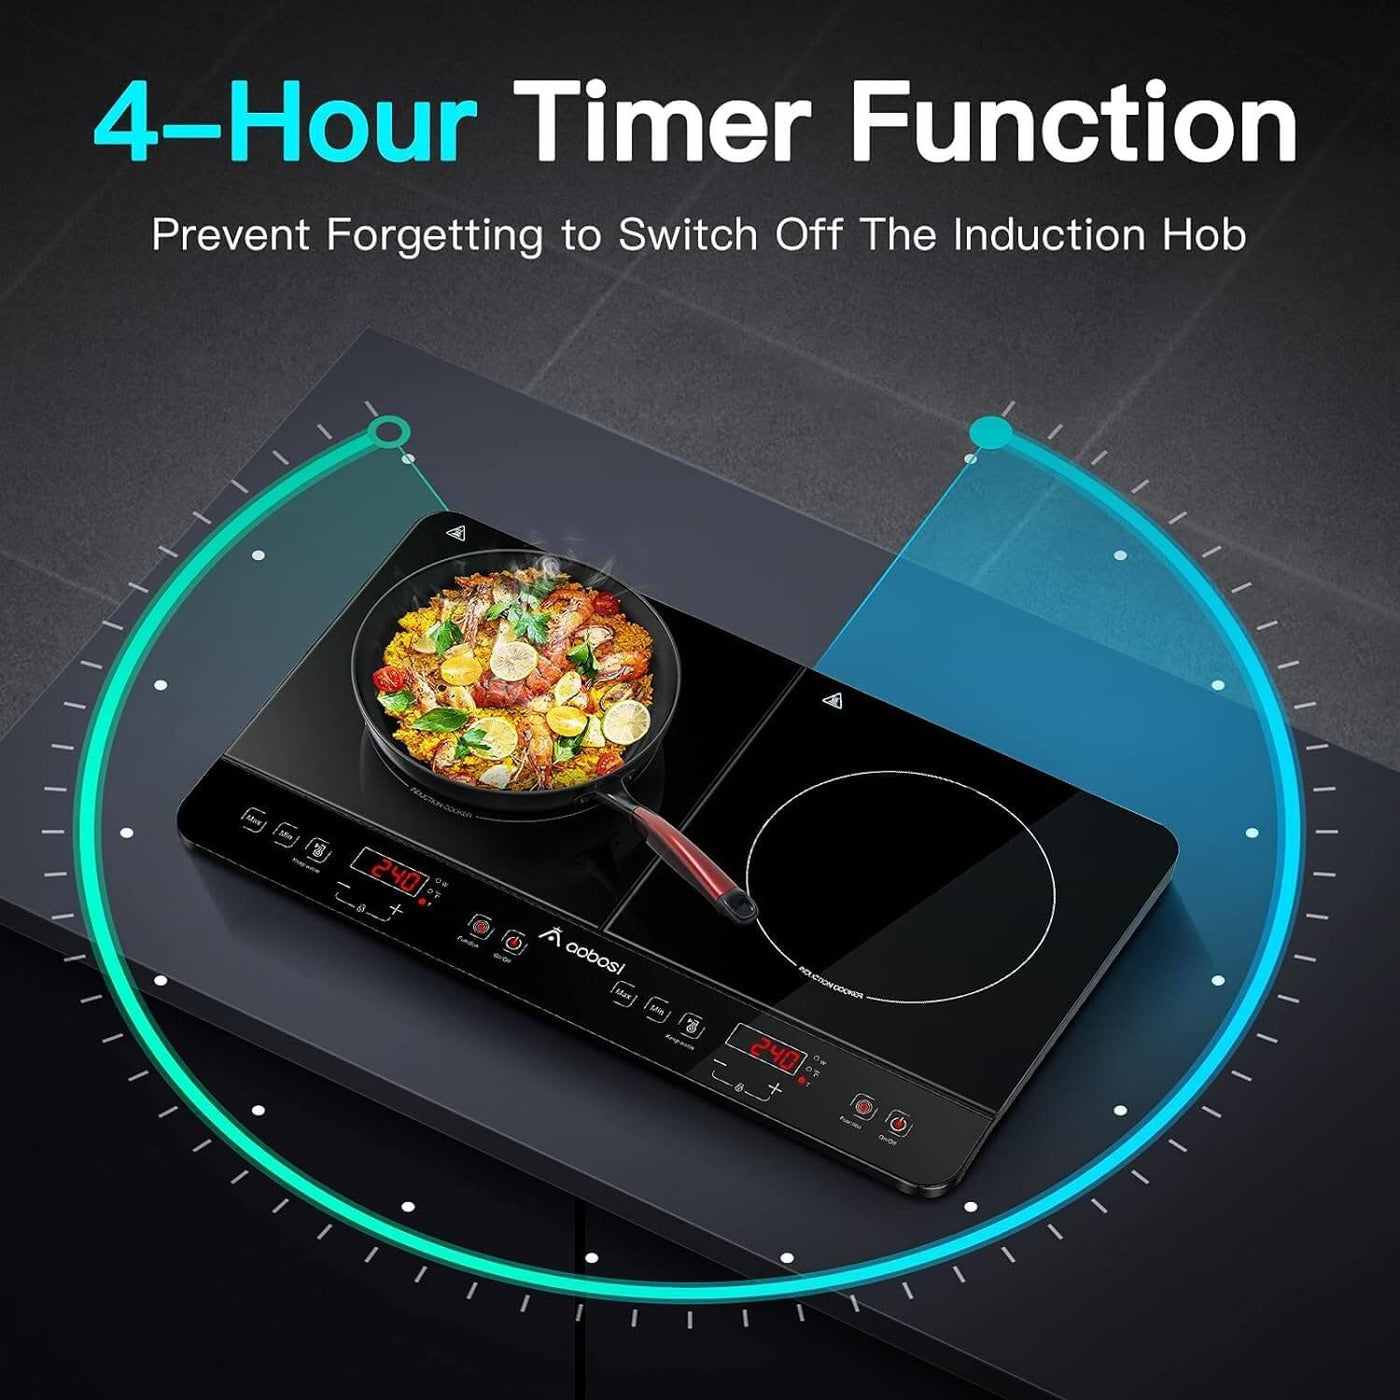 Double Induction Cooktop 4h timer function